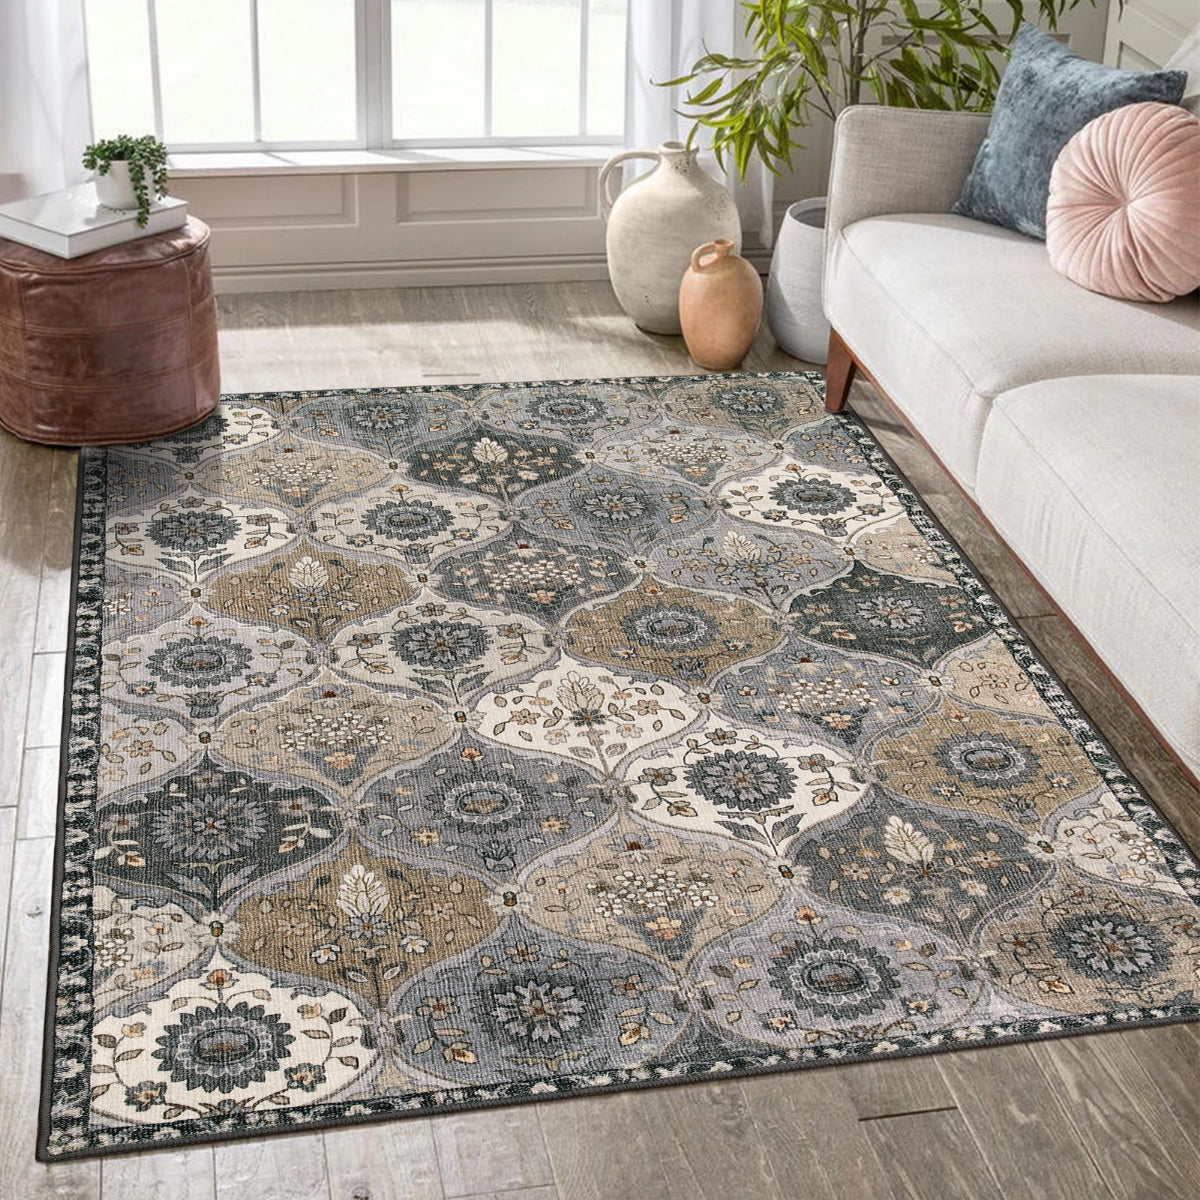 Lahome Boho Machine Washable Area Rug 3x5, Floral Printed Small Rugs for  Bedroom, Soft Non Slip Carpet for Bathroom Kitchen Nursery Bedside Entryway